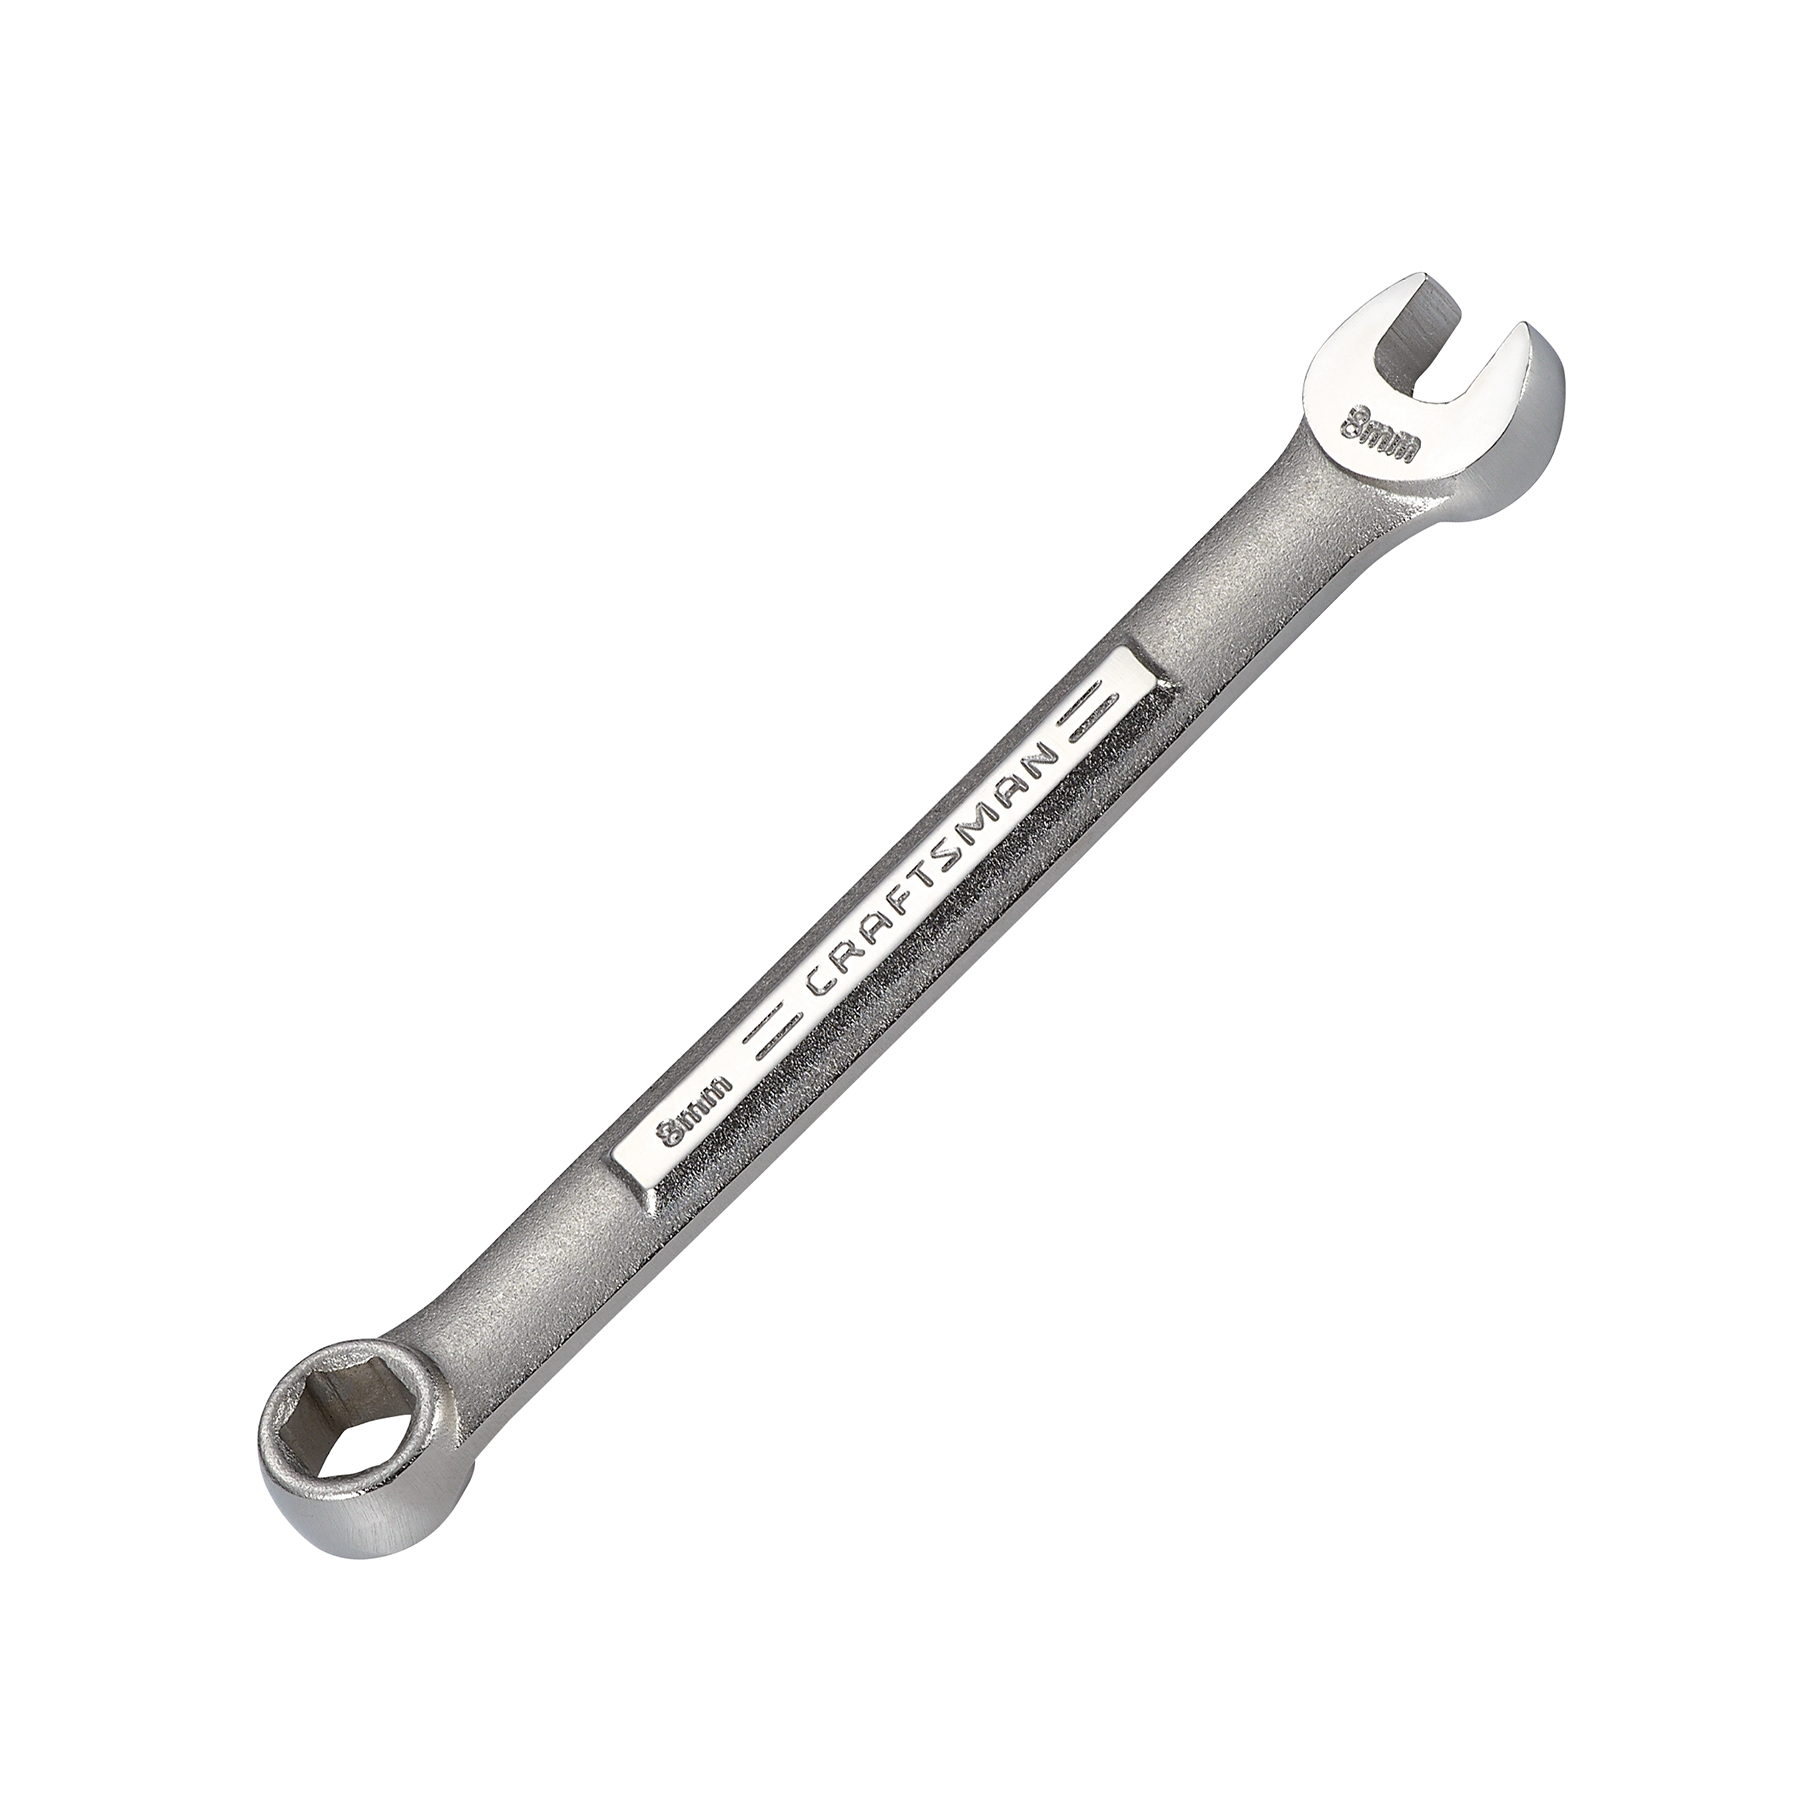 Craftsman 8mm Wrench  6 pt. Combination